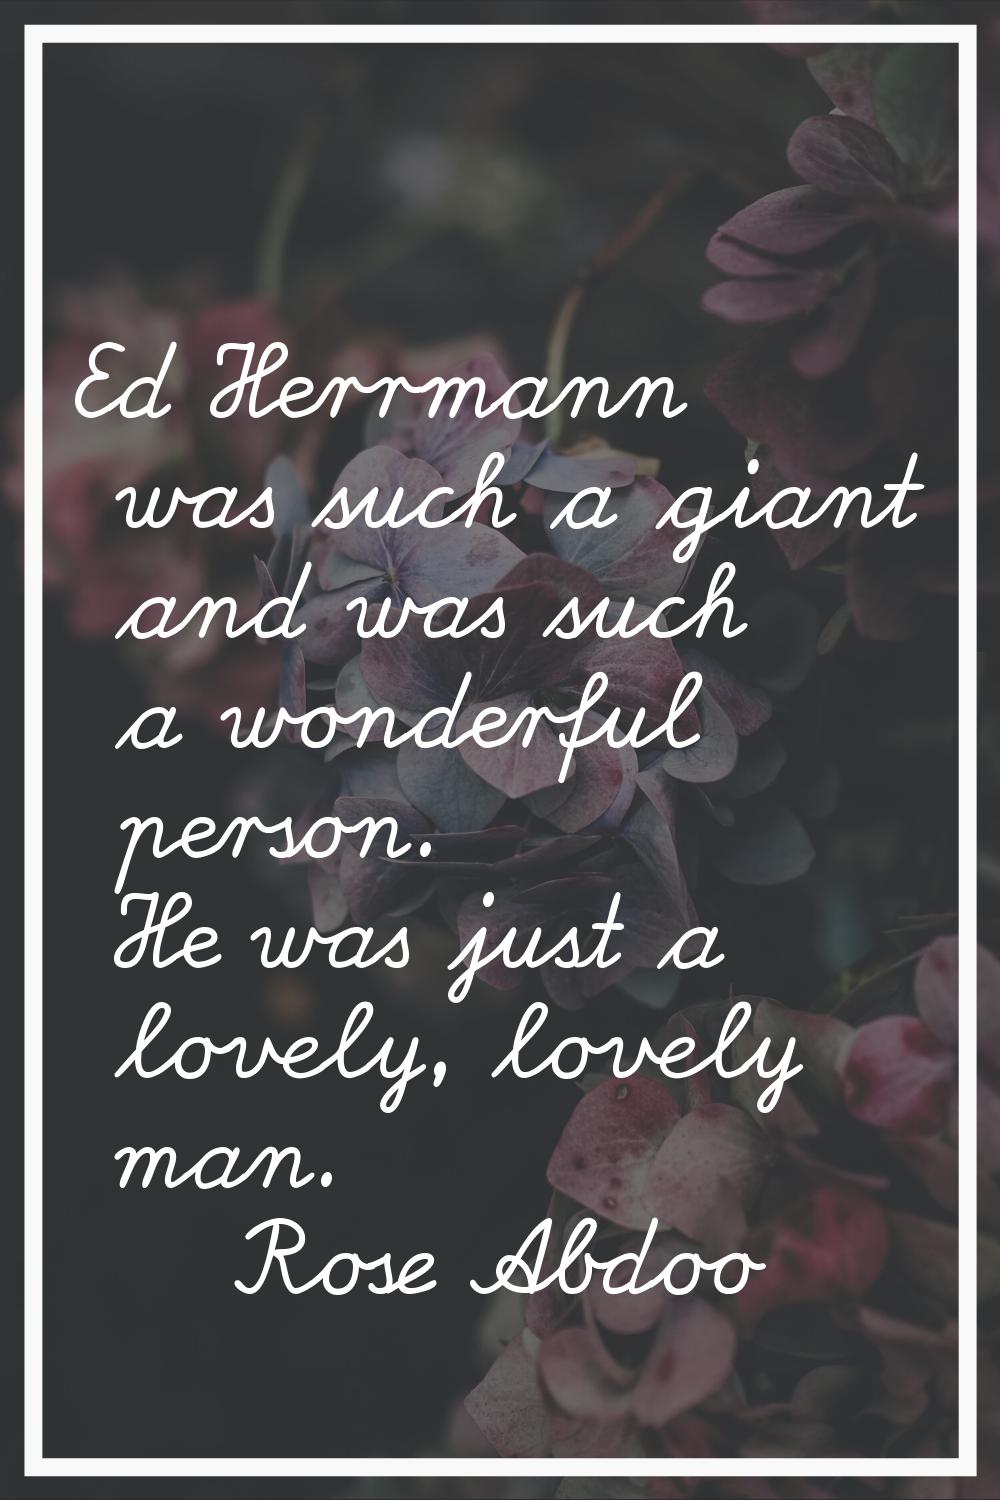 Ed Herrmann was such a giant and was such a wonderful person. He was just a lovely, lovely man.